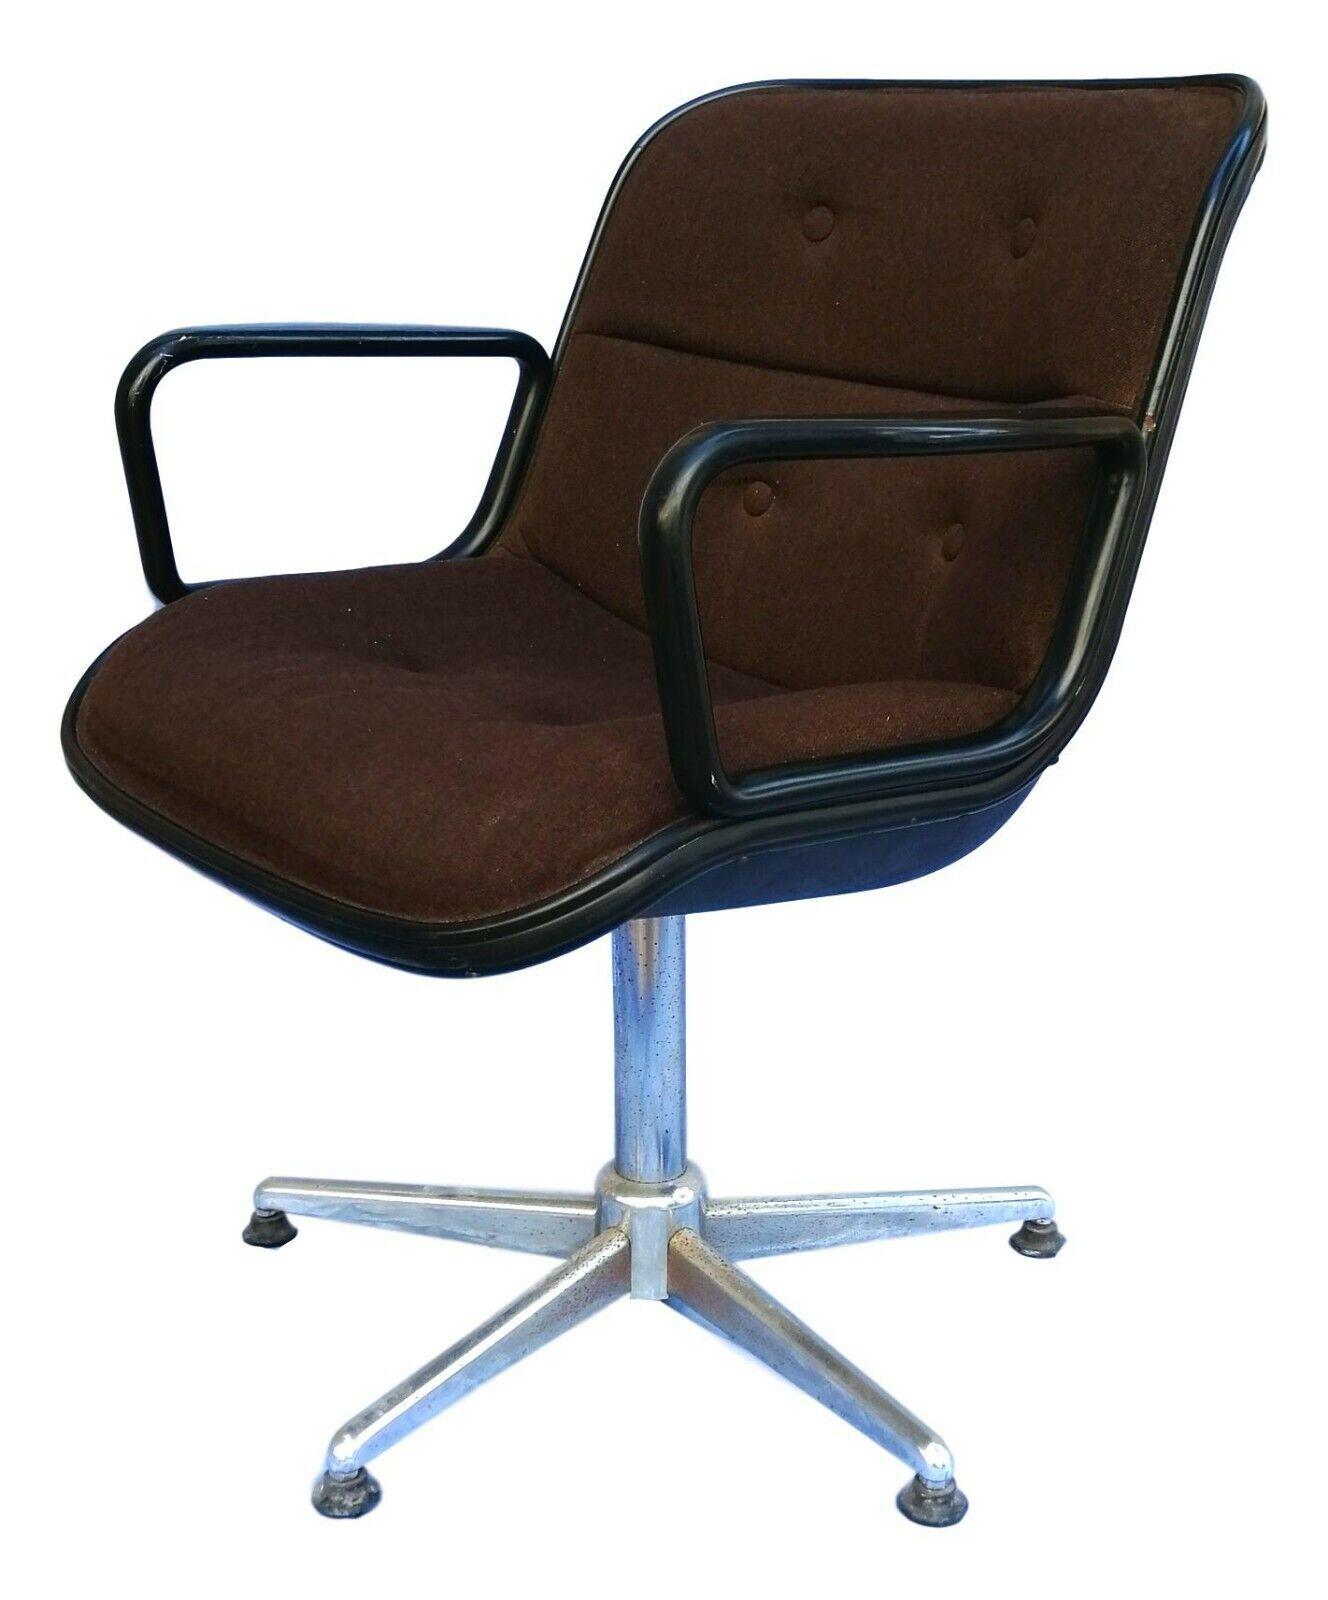 Iconic executive office chair designed in 1962 by charles pollock for knoll.

Sturdy and solid structure, weighs just under 20 kilos, upholstered in brown fabric.

Very good condition, as shown in photos, slight obvious signs of aging and